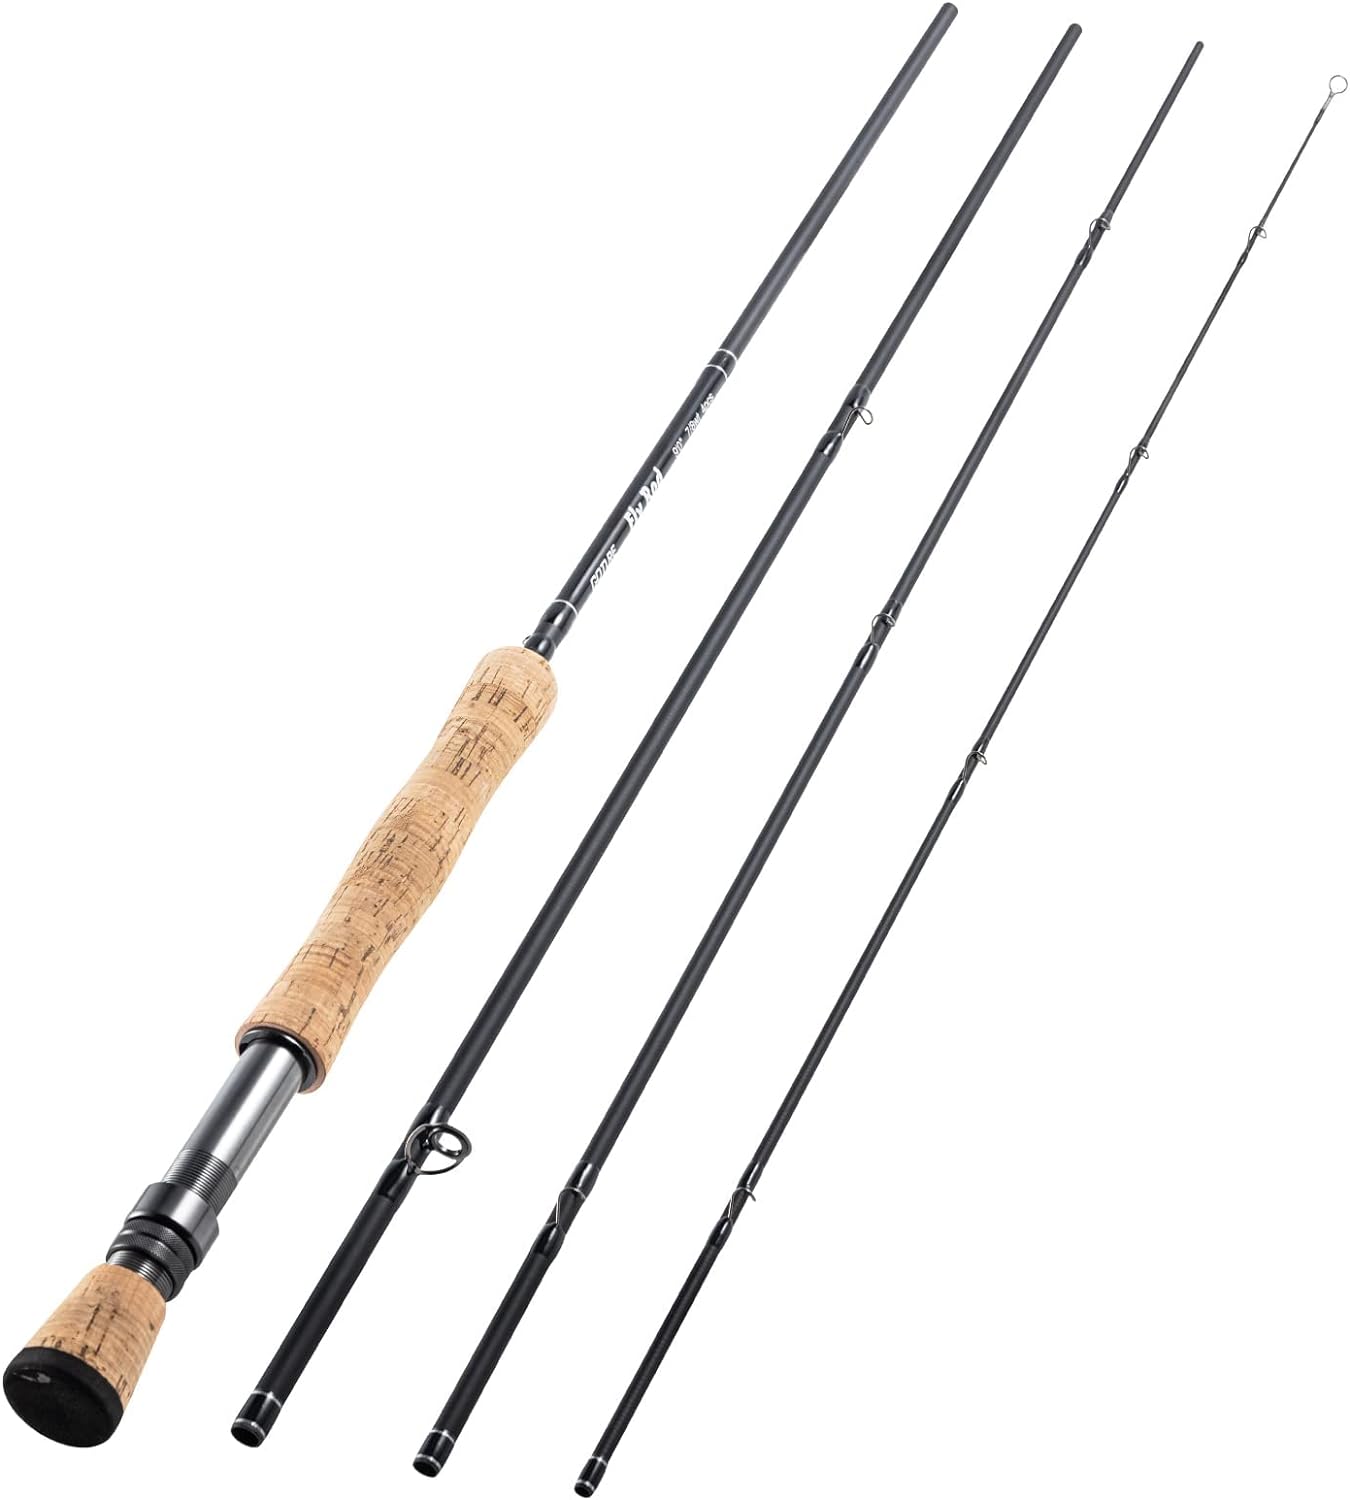 Goture Fly Fishing Rod, 9ft 4 Piece Fly Rod with Carrying Case Freshwater Saltwater, 24T/30+36T Carbon Fiber Blank 4WT 5WT 7WT 8WT Fly Rod, Travel Fly Fishing Rod for Walleye Bass Salmon Trout Fishing